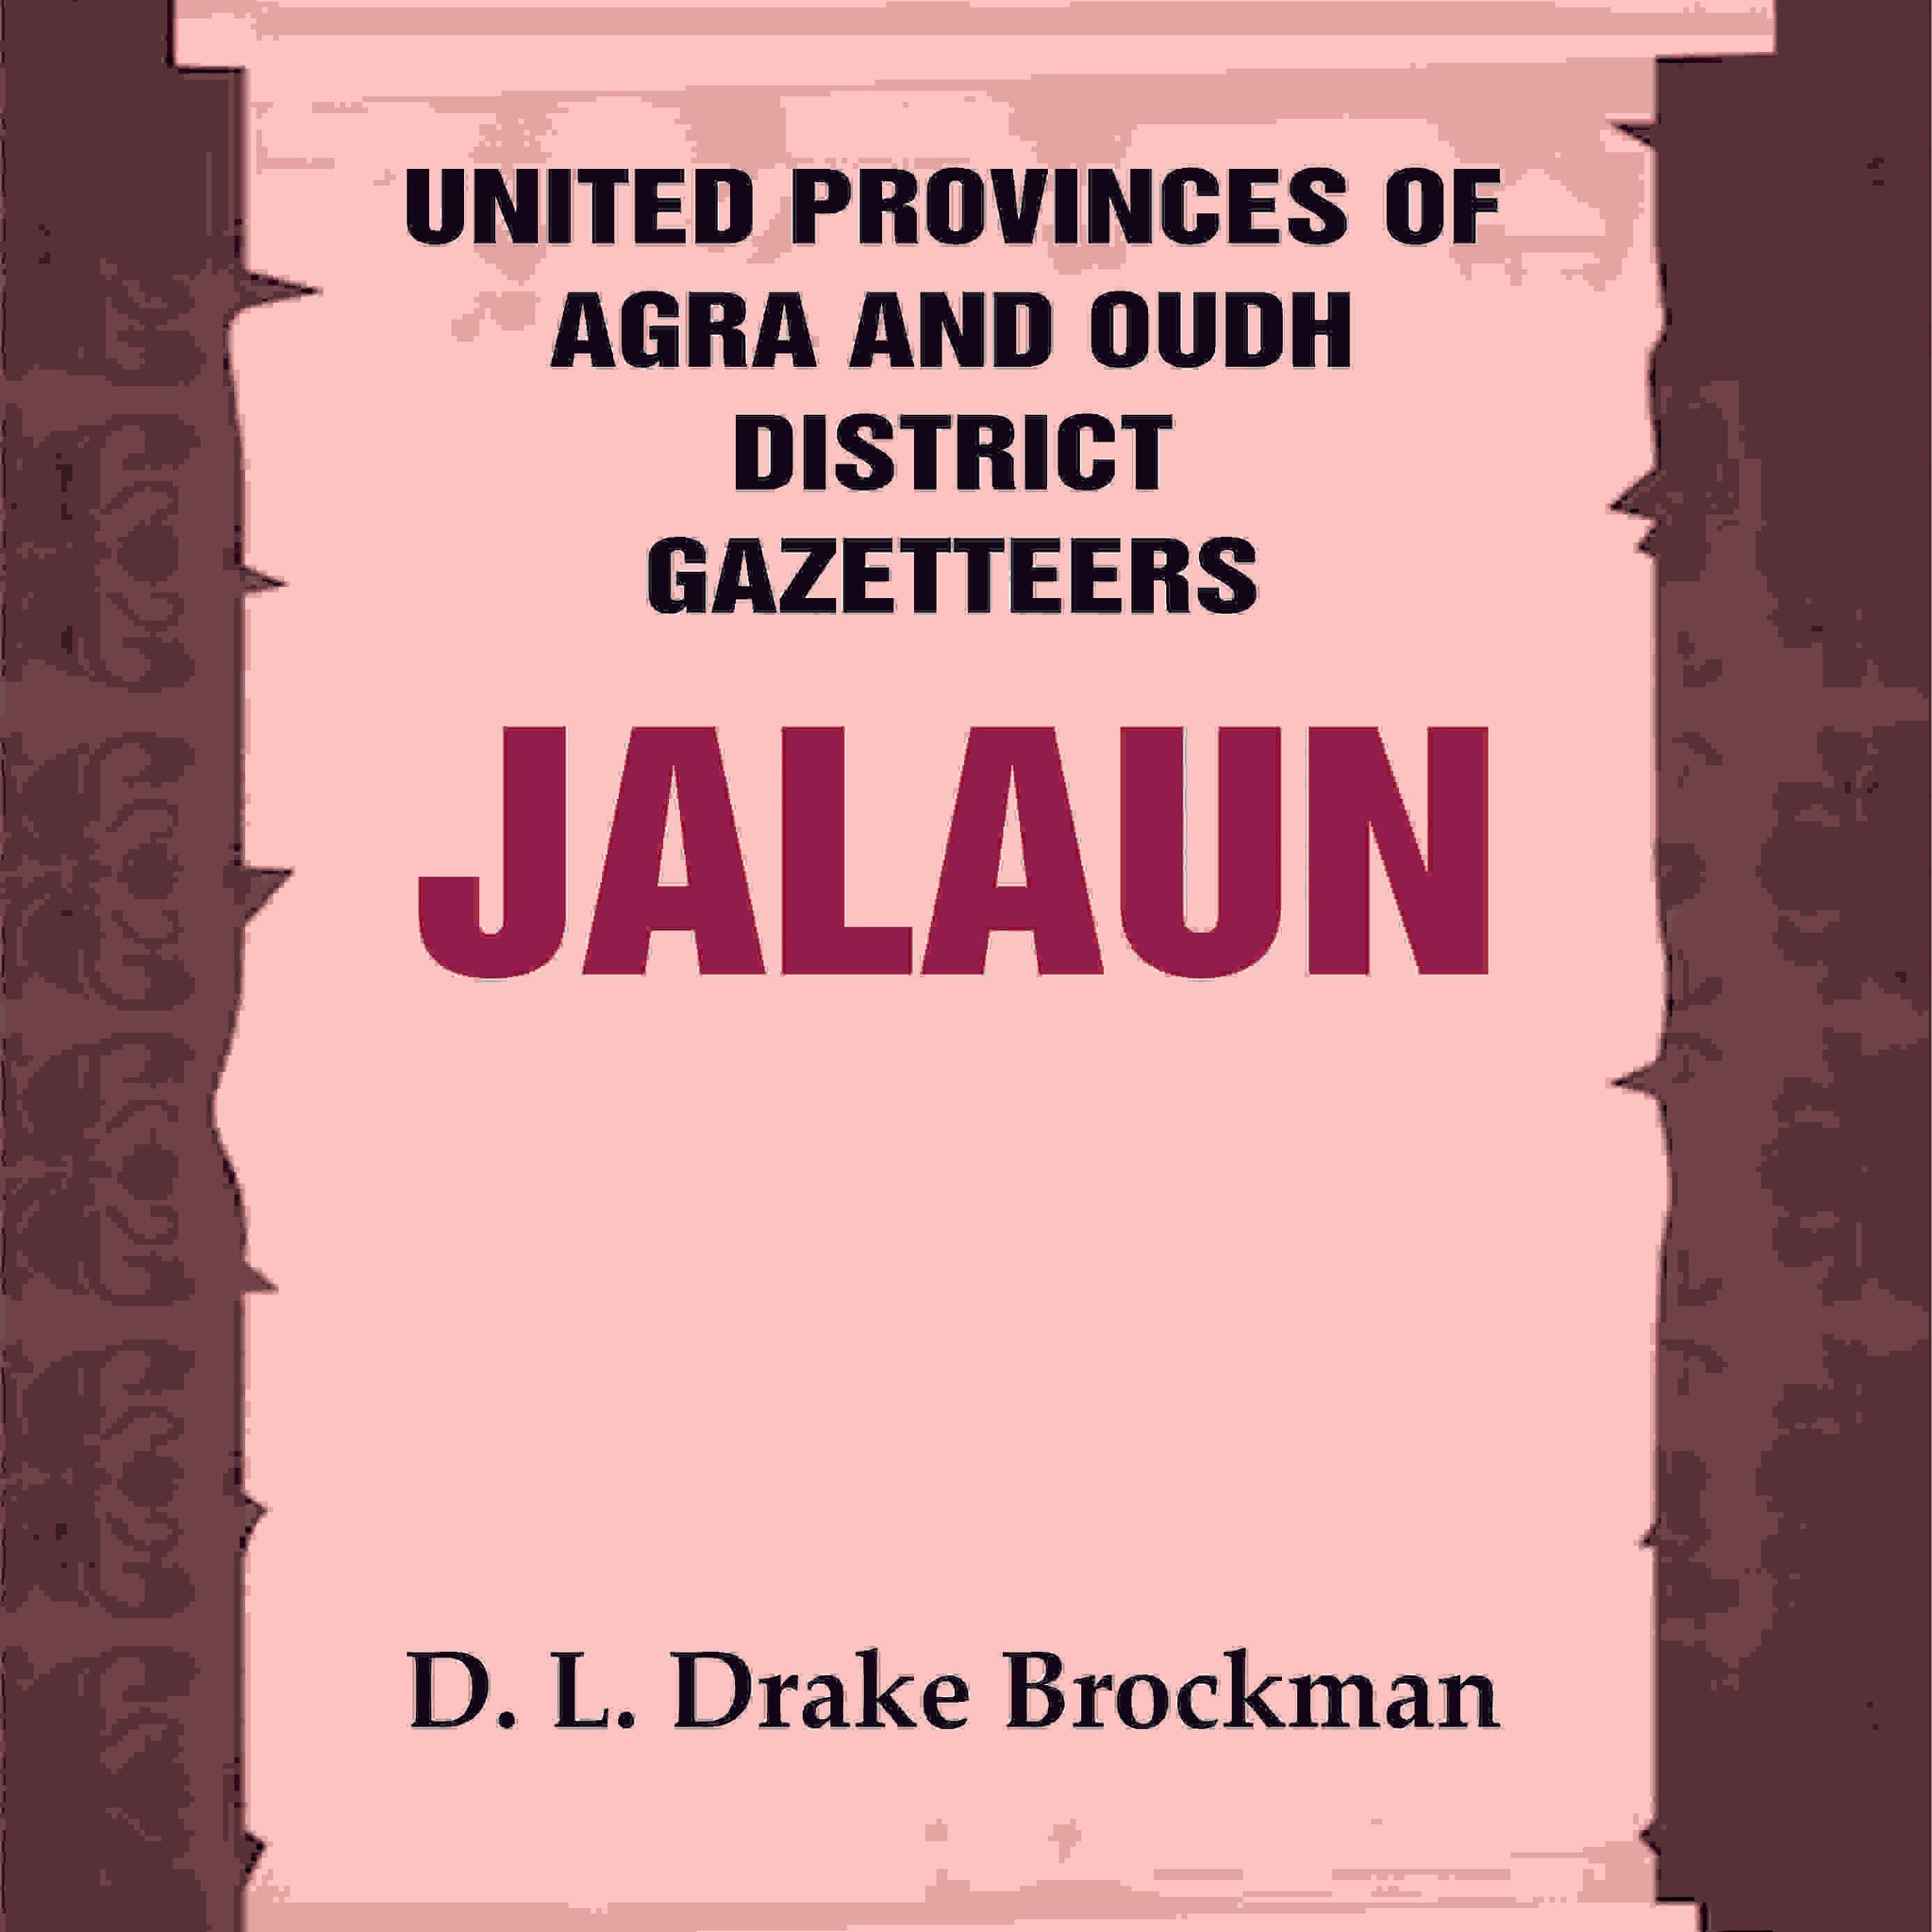 United Provinces of Agra and Oudh District Gazetteers: Jalaun